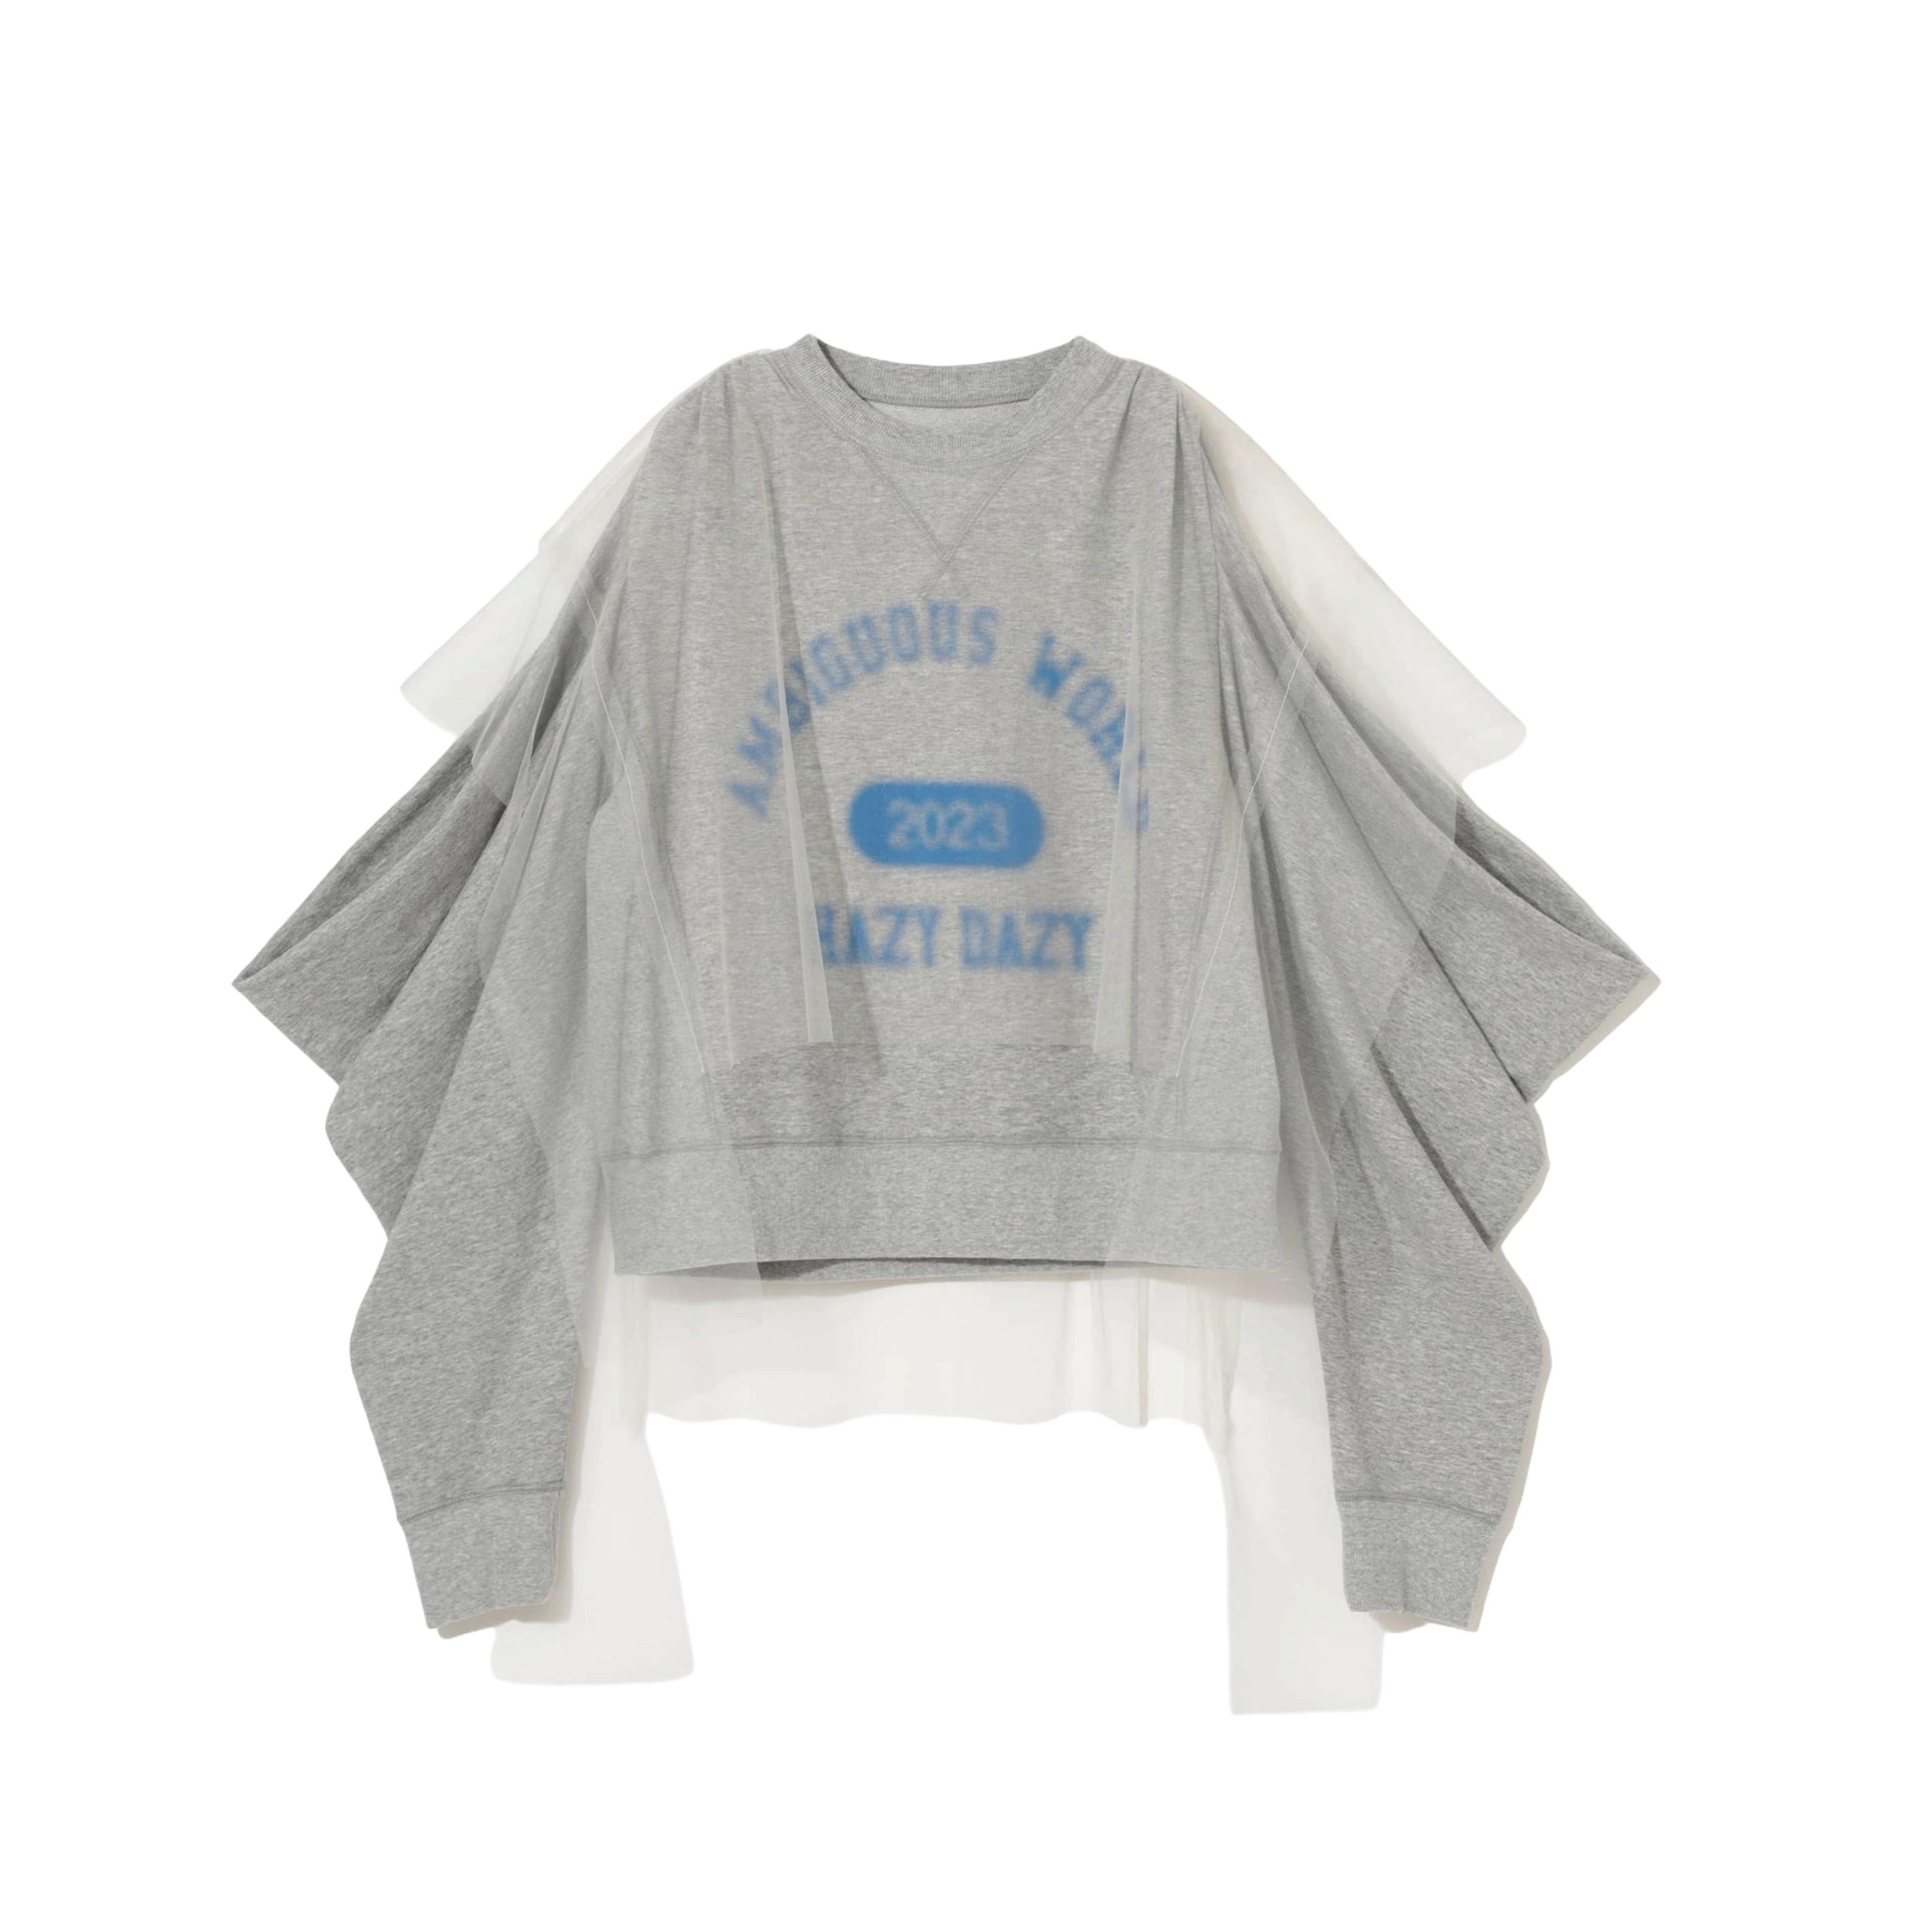 UNDERCOVER - Women's Jersey - (Grey) by UNDERCOVER